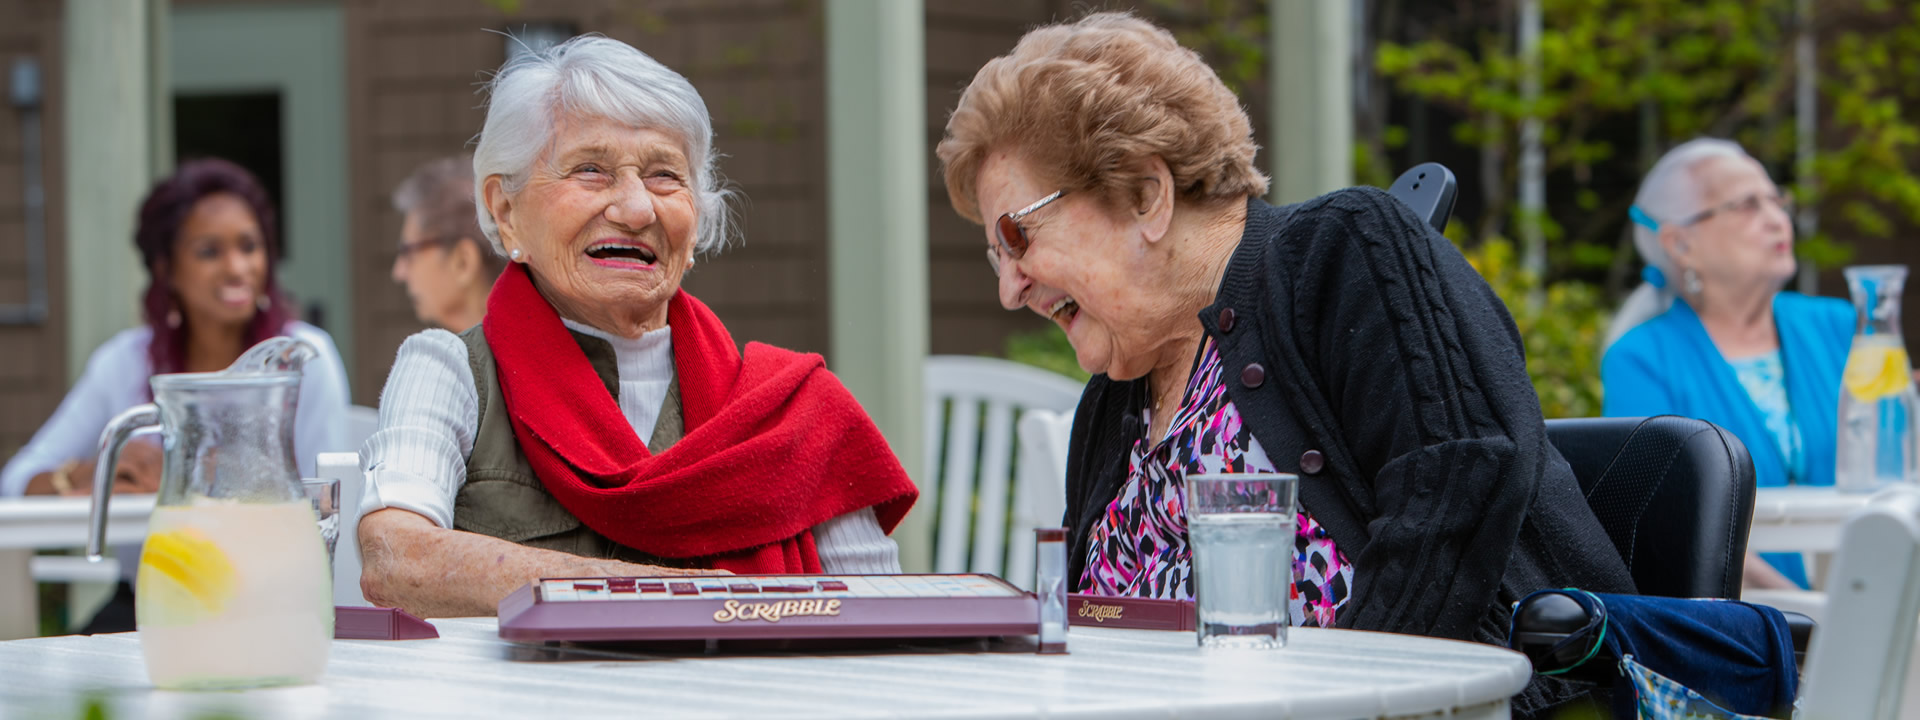 Two women residents having fun playing a game of scrabble on the outdoor patio.